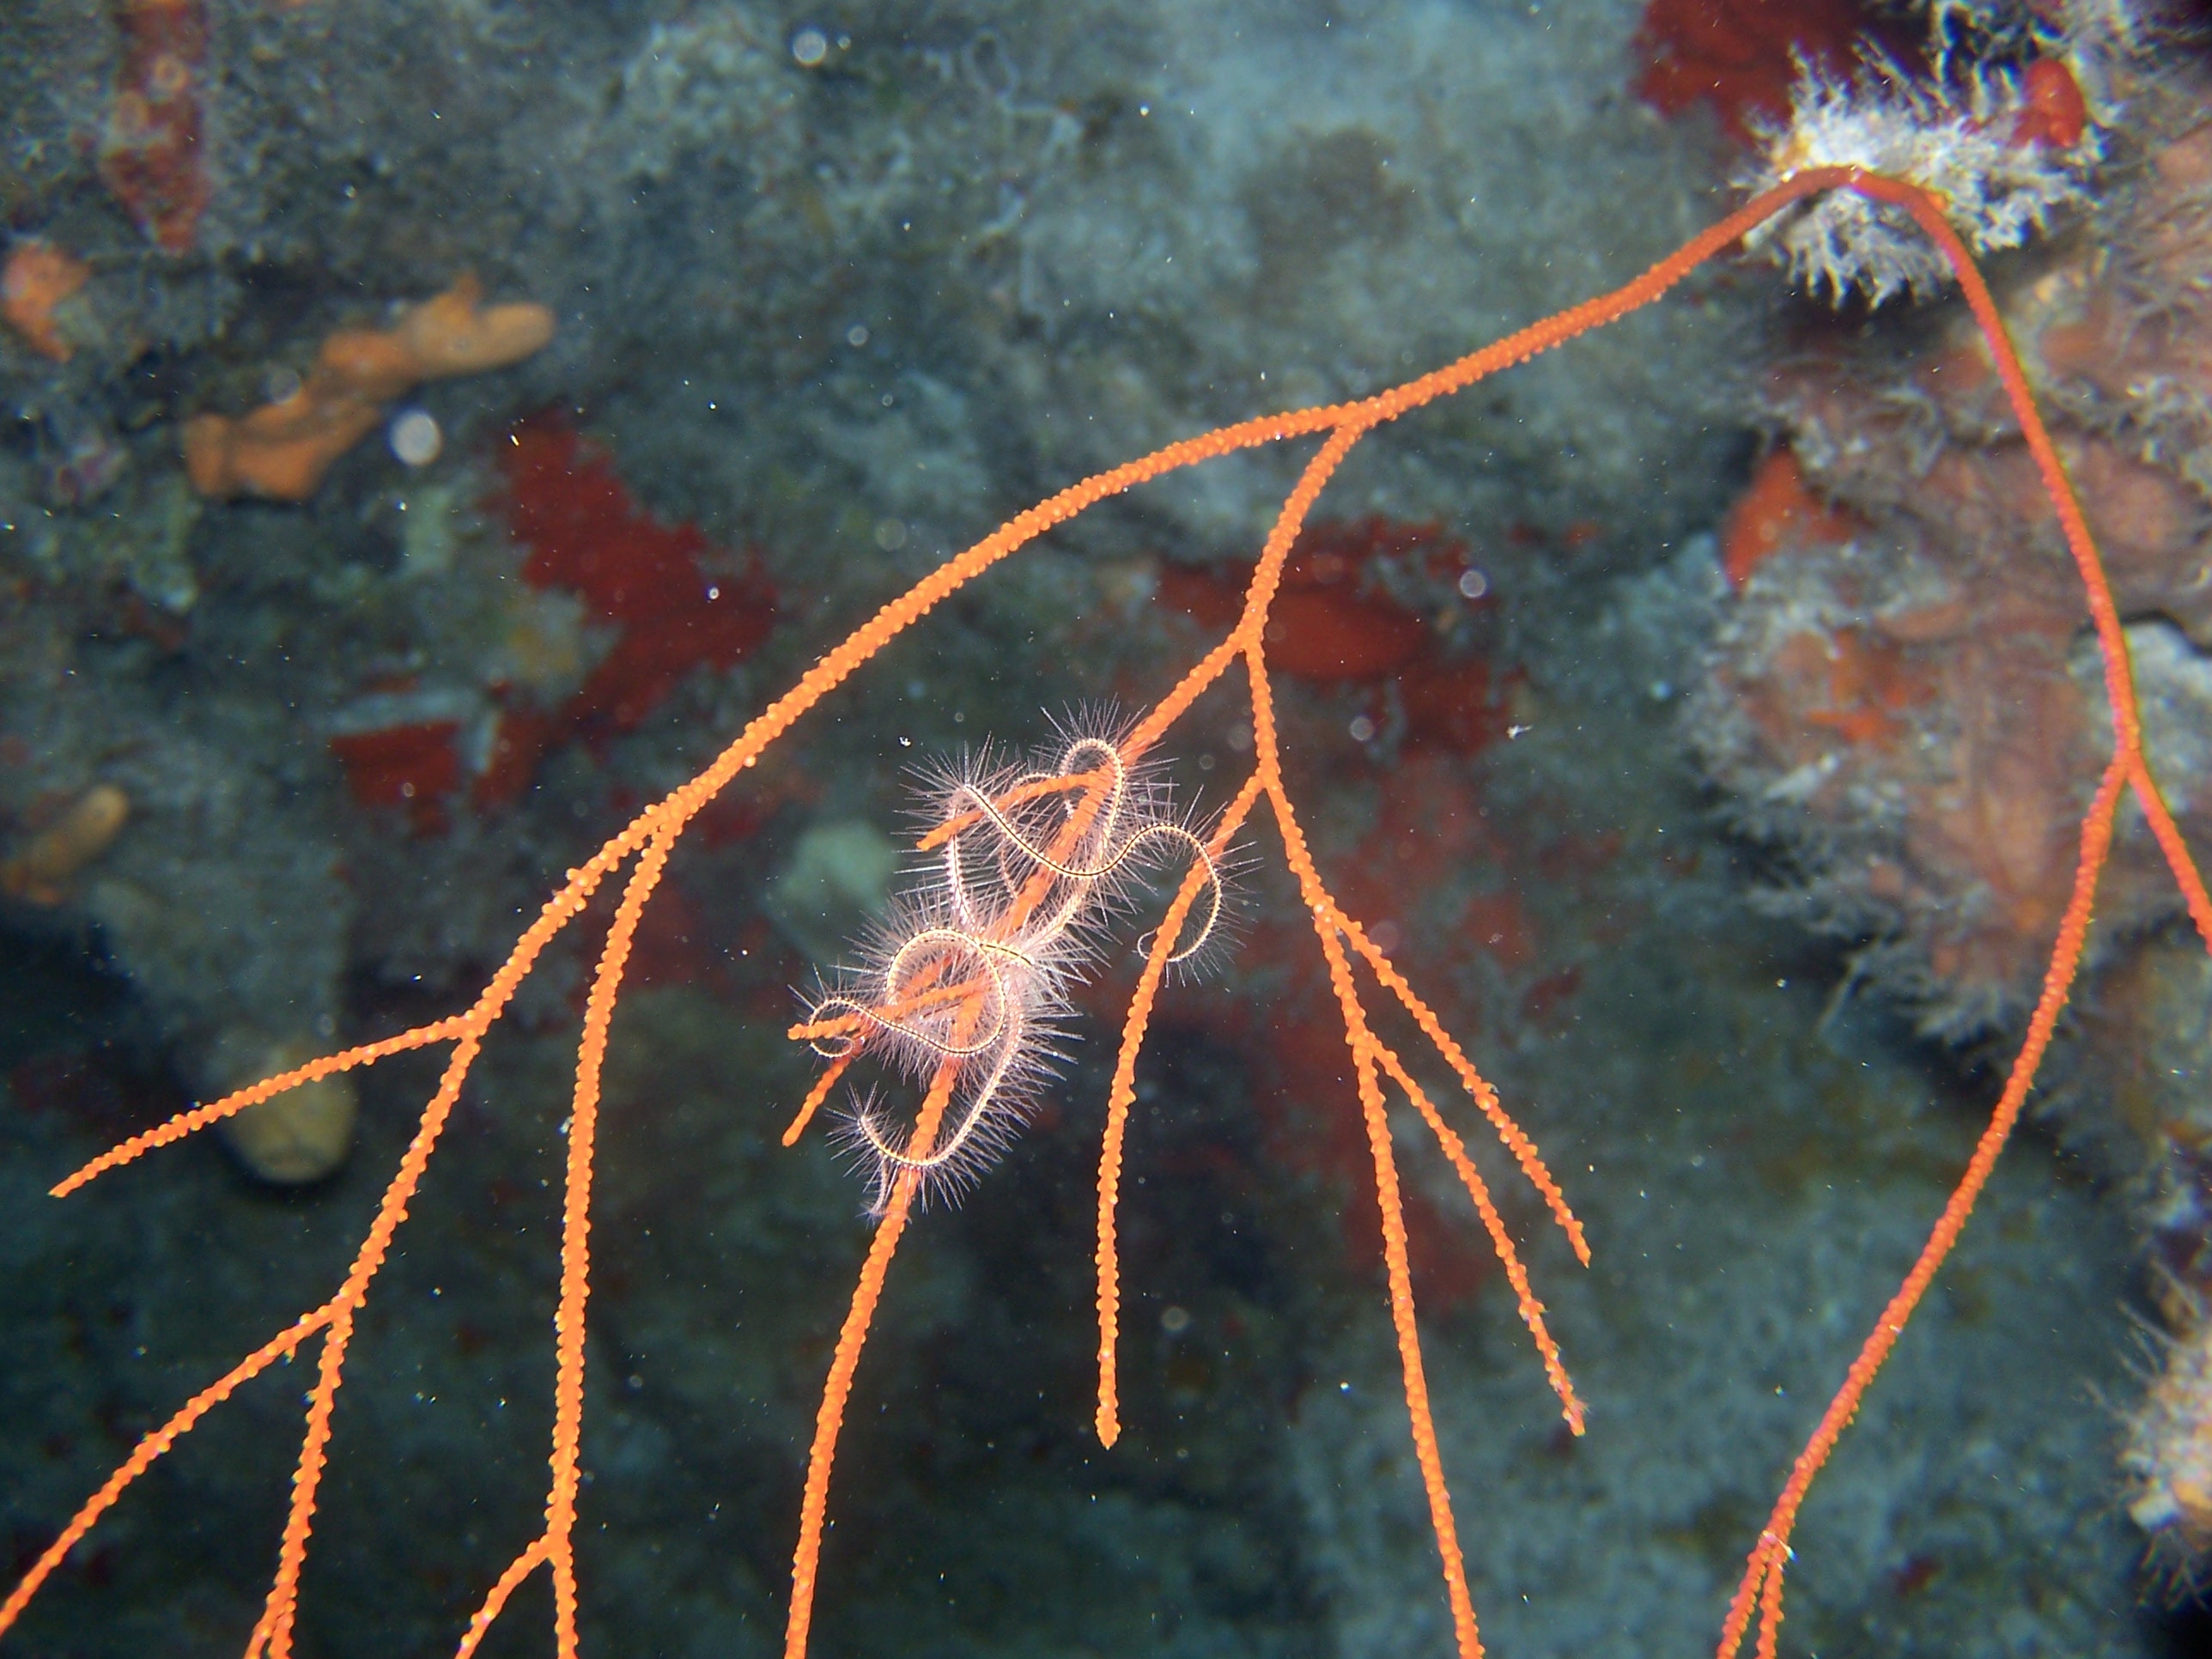 Brittle star hanging on tight